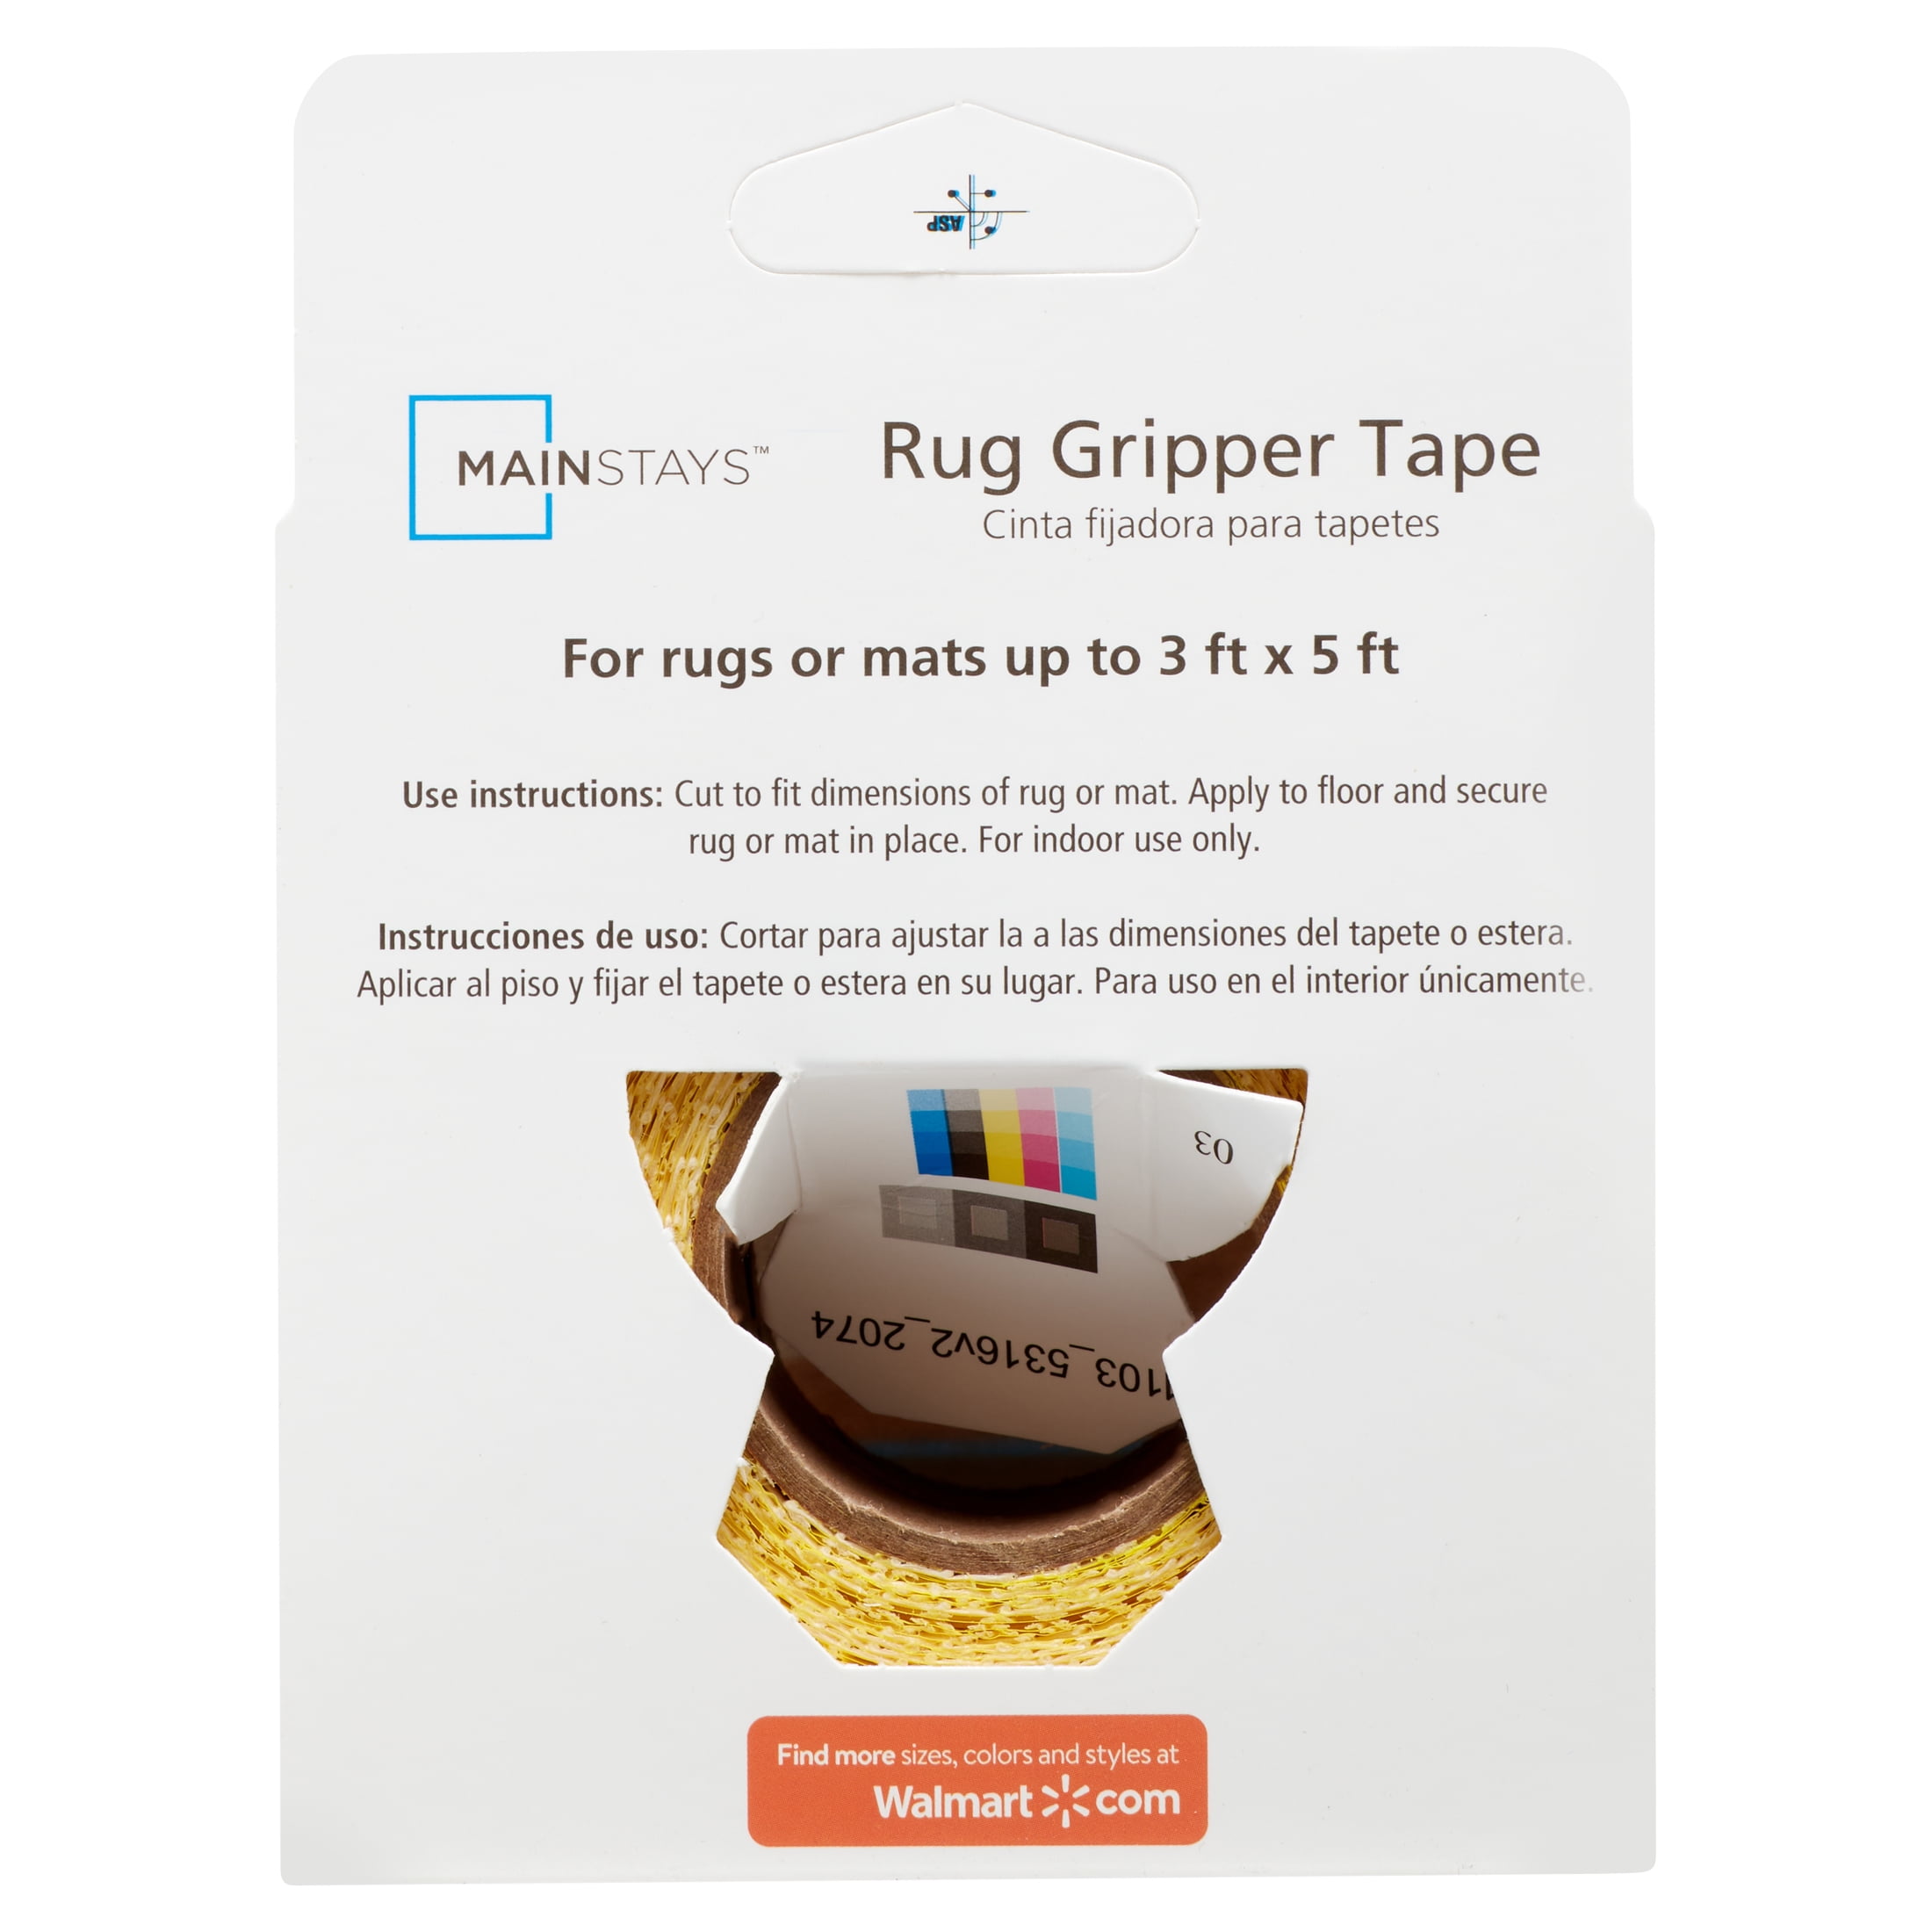 Lok Lift Rug Gripper for Small Rugs, 2.5 x 25